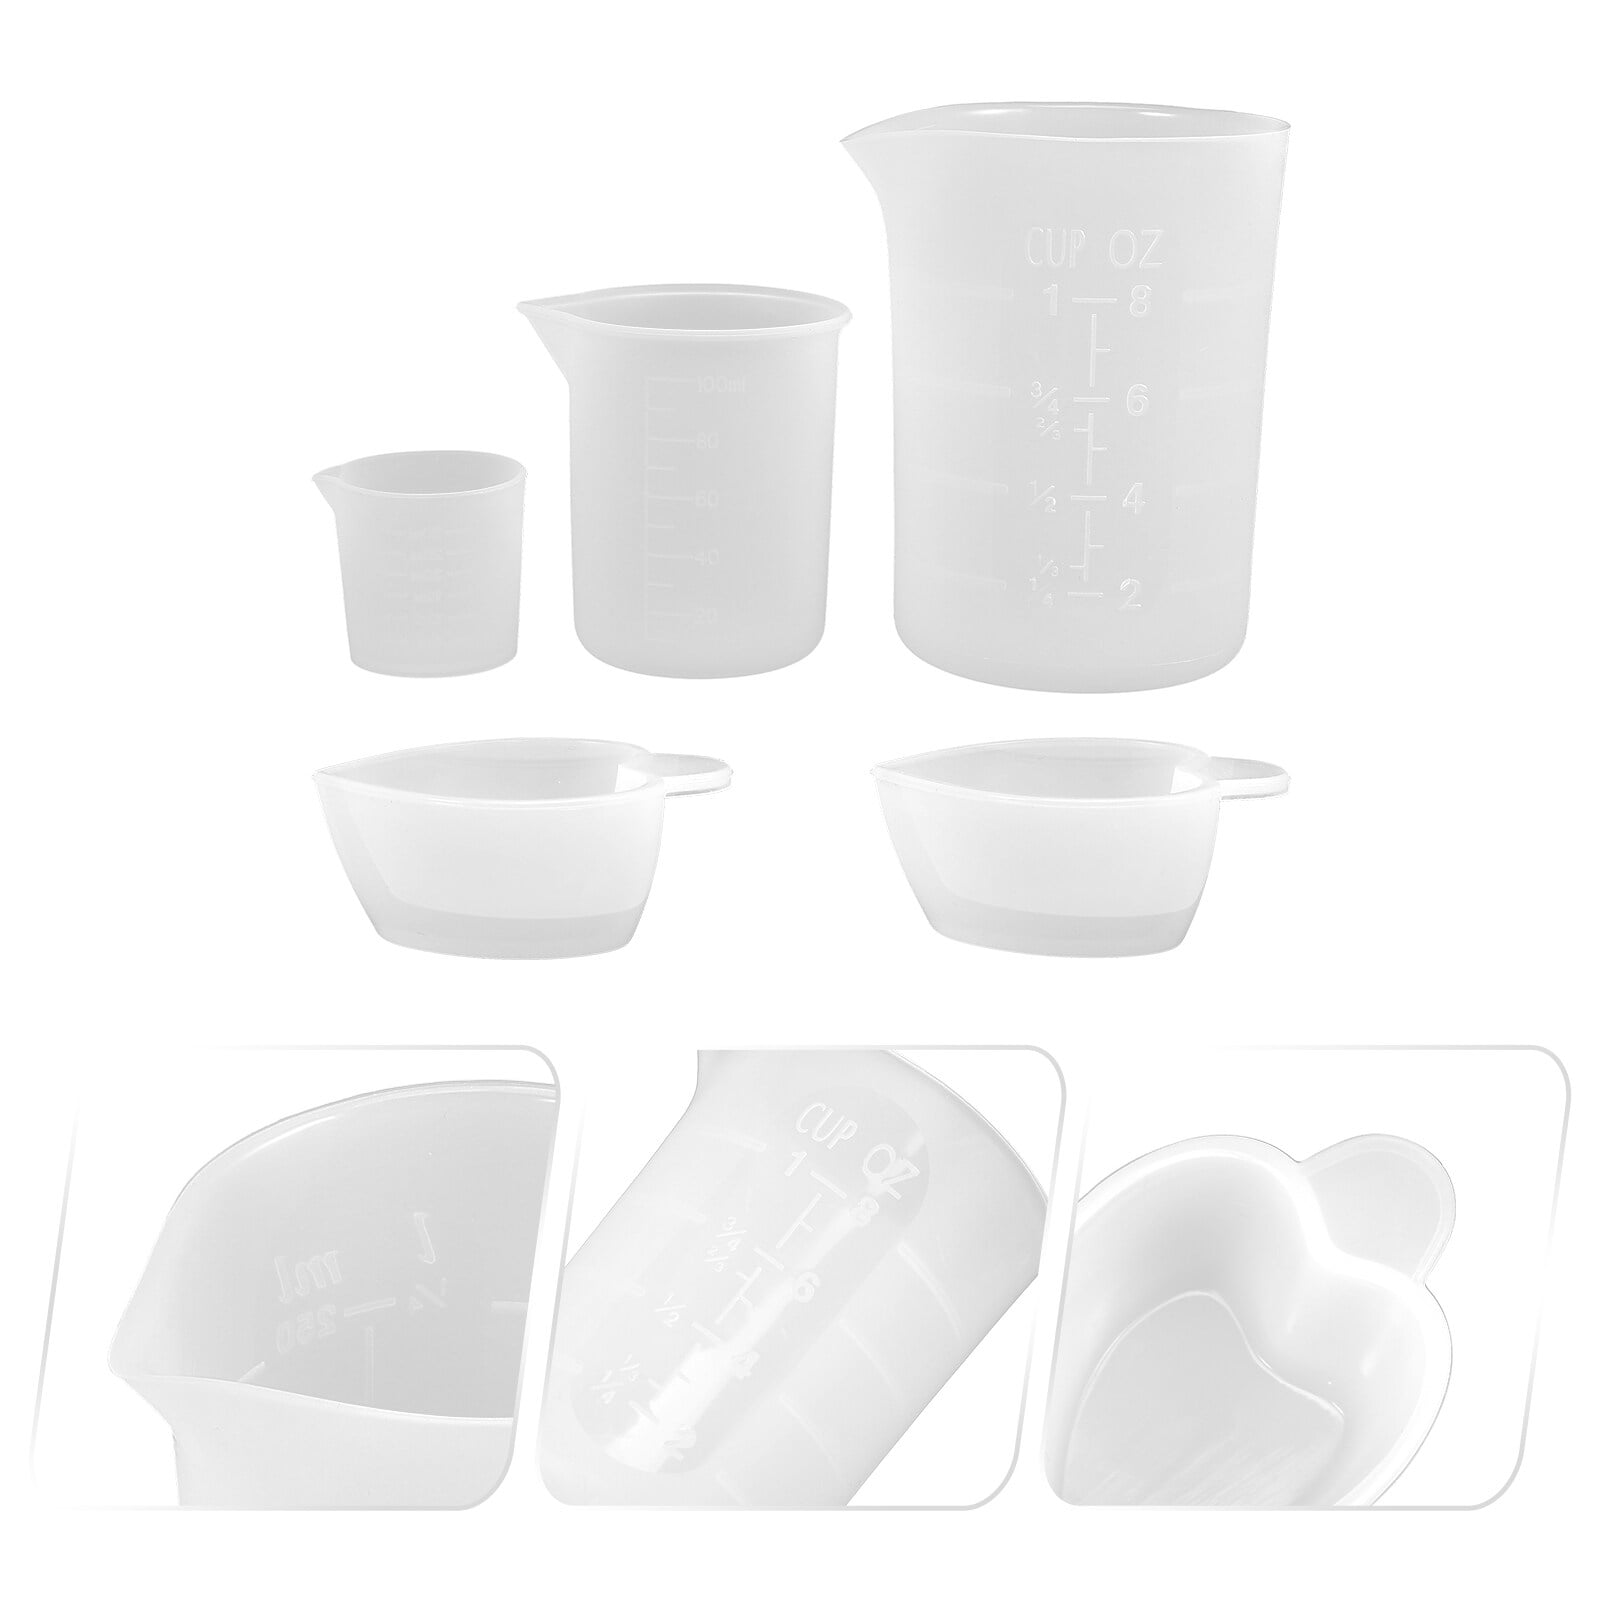 EUBUY Silicone Resin Measuring Cups Tool Kit Large Epoxy Resin Mixing Bowl  Jewelry Making Waxing Mold with Silicone Stir Sticks Pipettes Finger Cots 